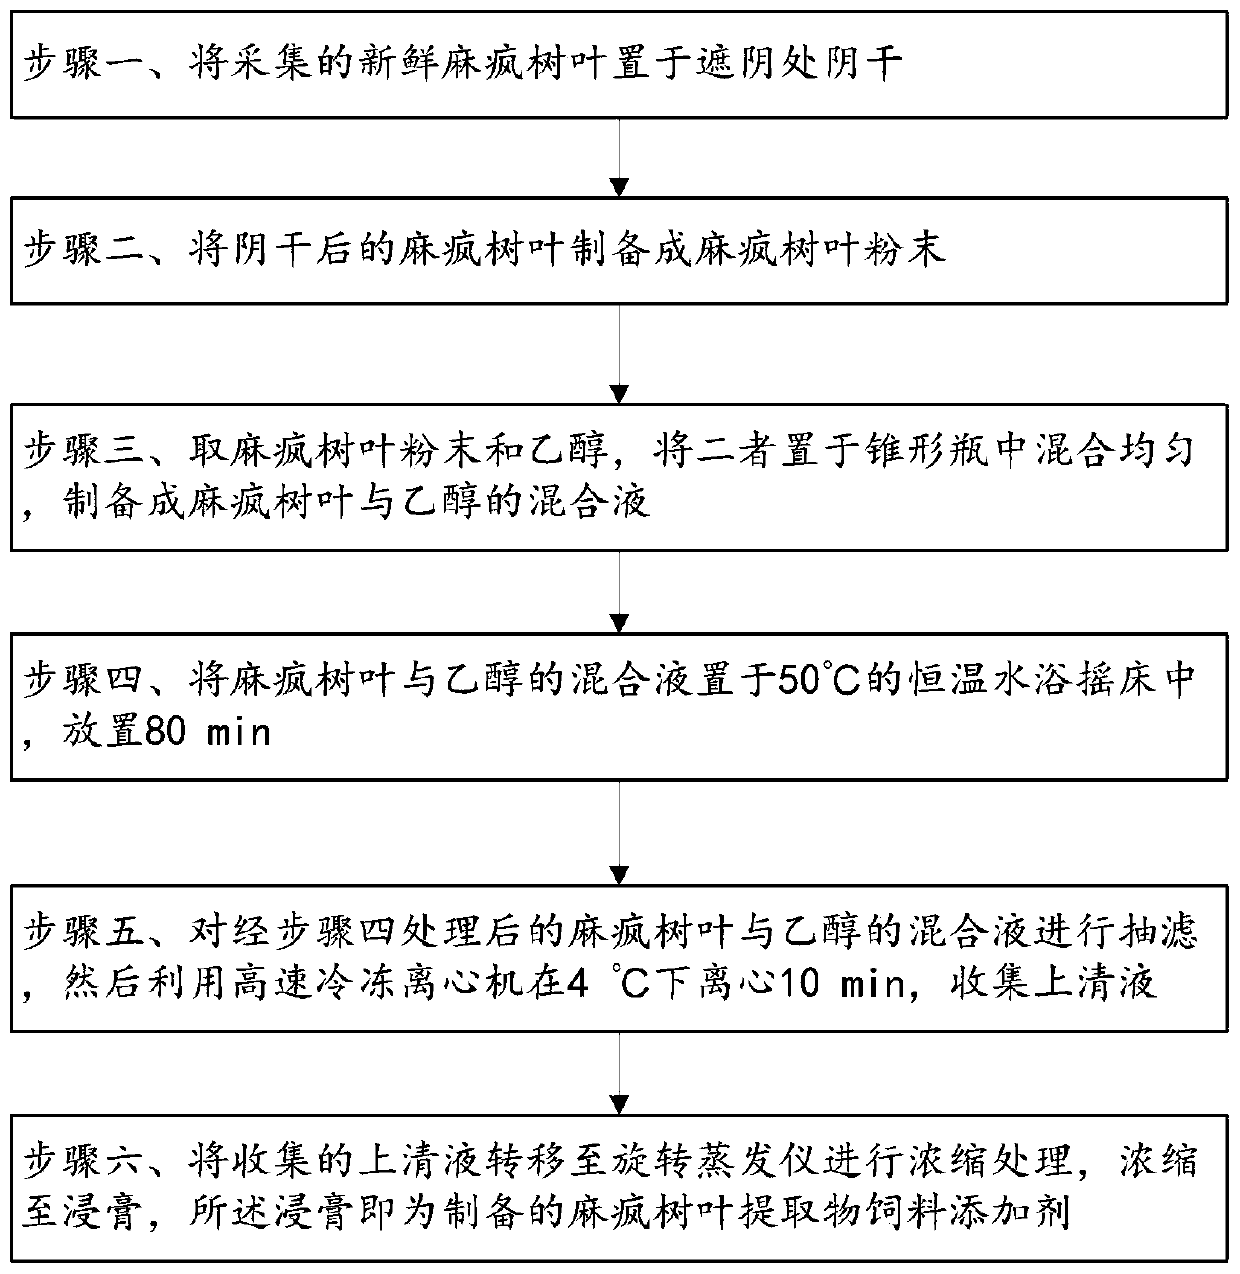 Preparation method and application of jatropha curcas leaf extract feed additive